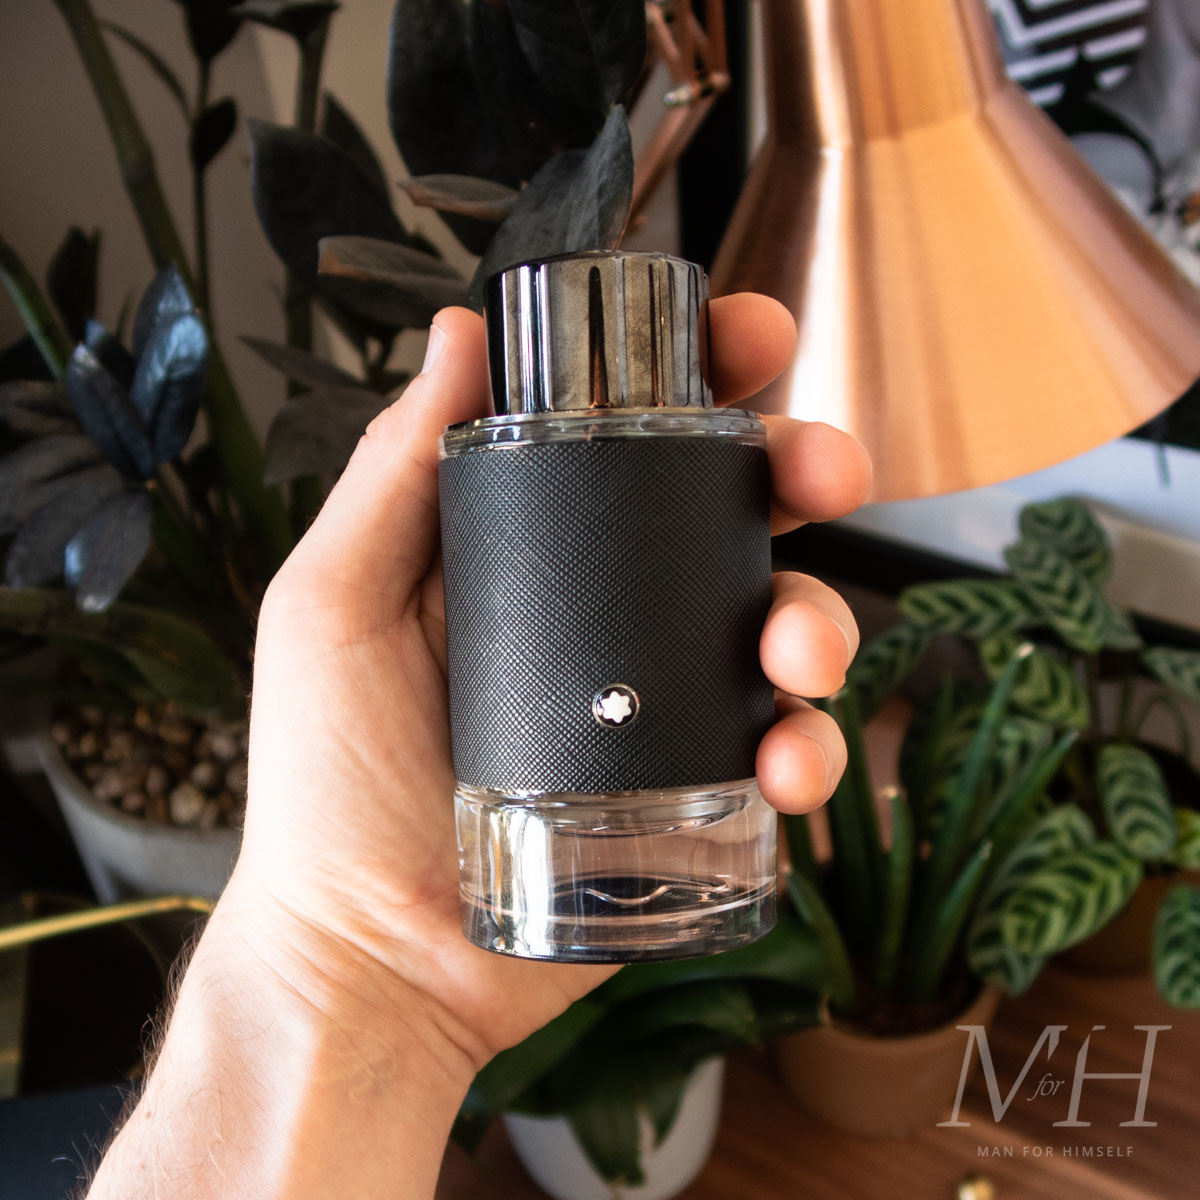 mont-blanc-explorer-fragrance-grooming-product-review-man-for-himself-2